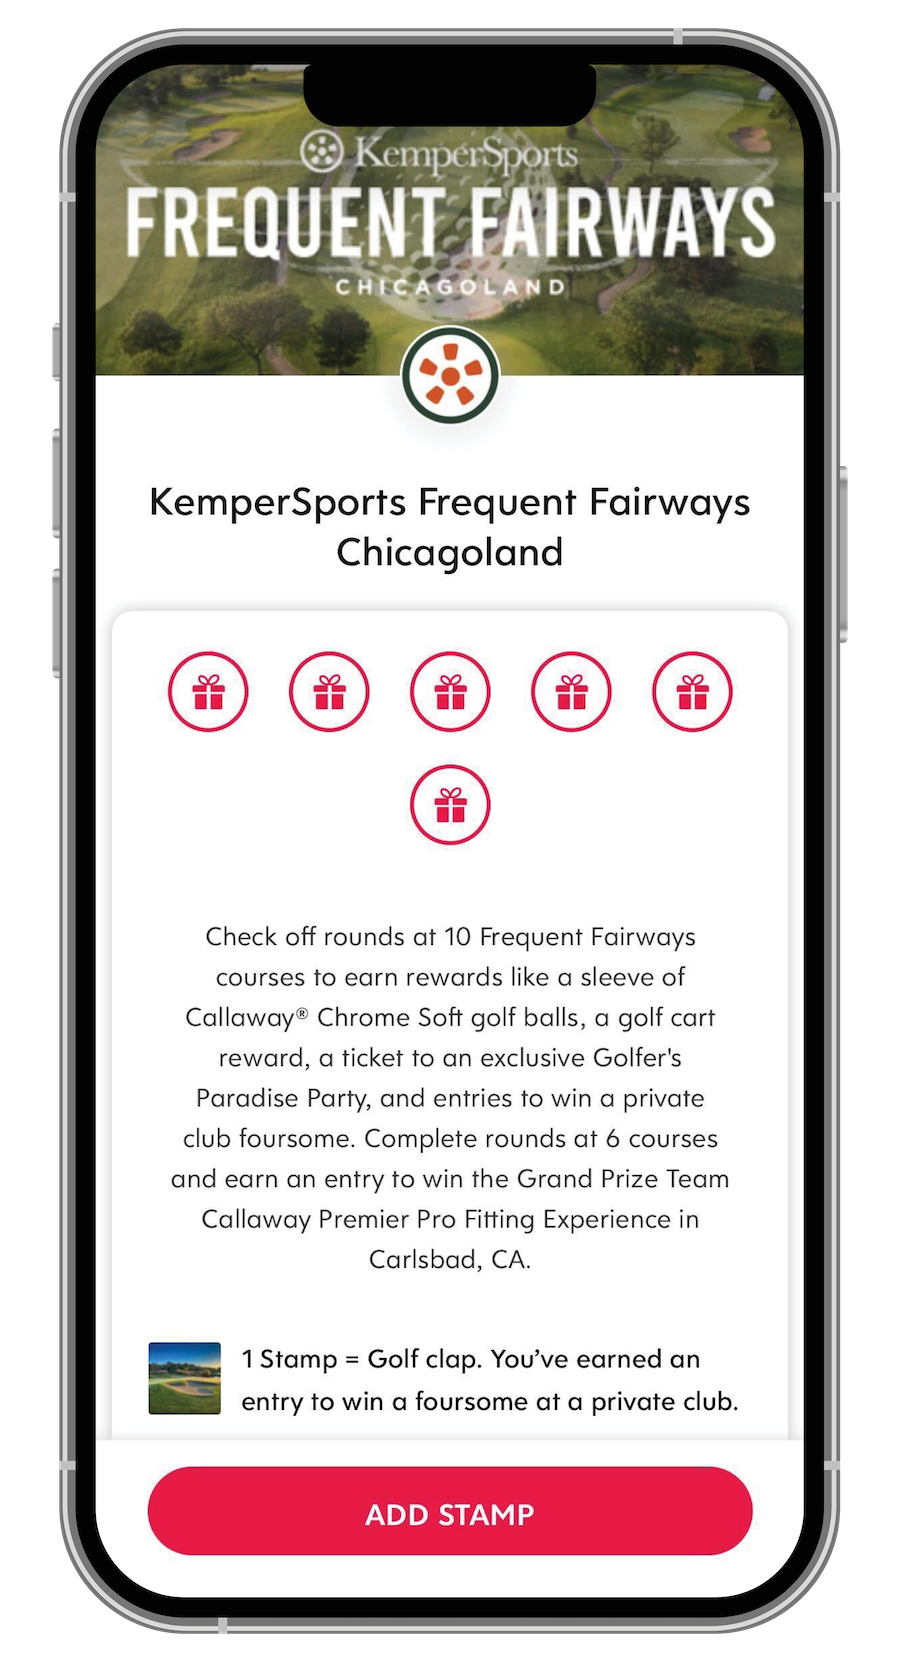 A screenshot of the homepage on the KemperSports Frequent Fairways Chicagoland app.